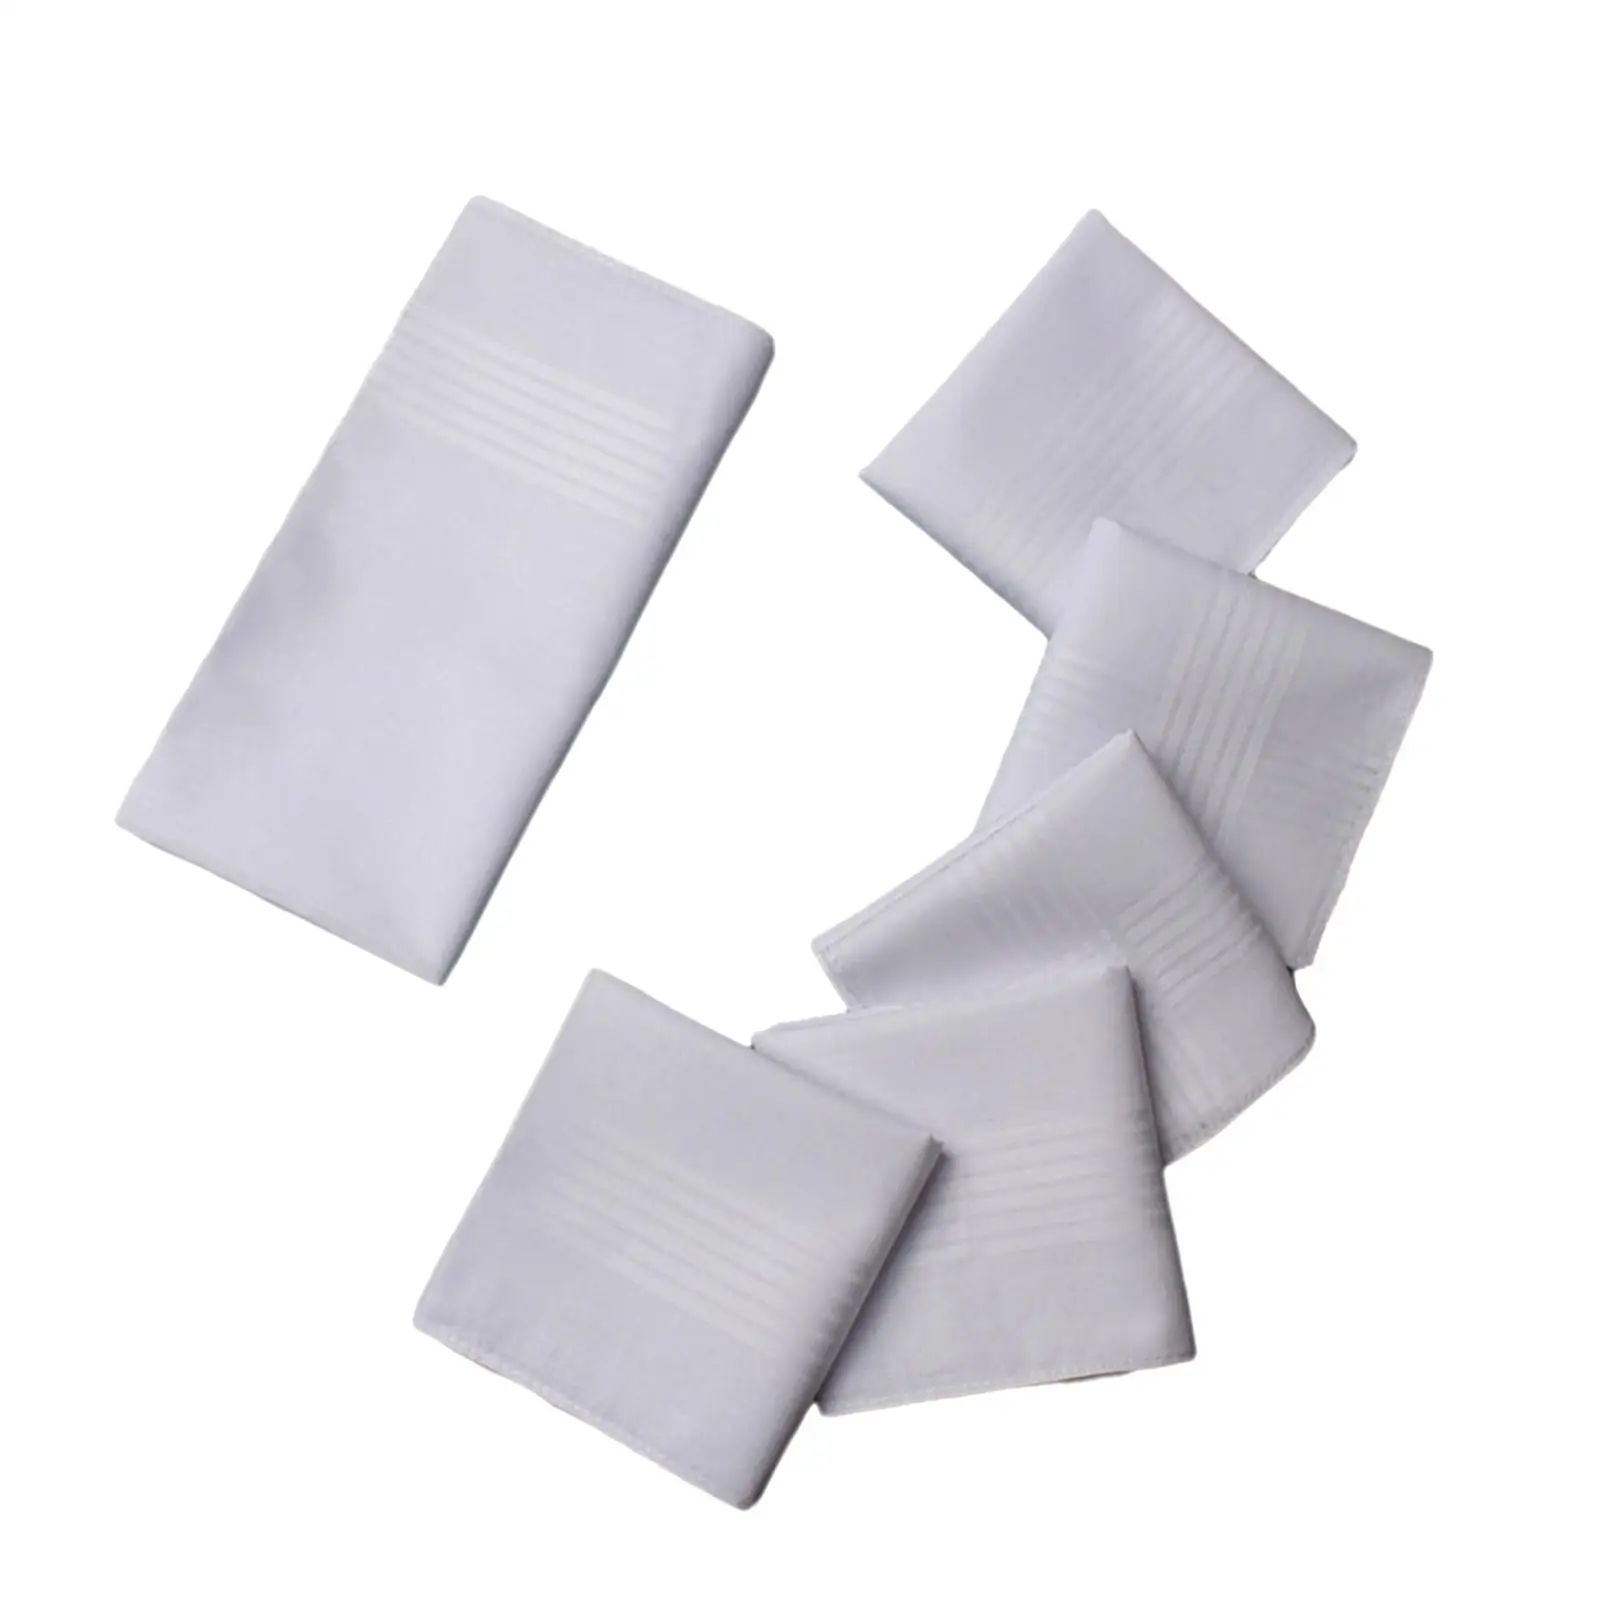 6Pcs Pure White Mens Handkerchief Hankies Gift Set Soft Combed Cotton Pocket Square for Gents Everyday Use Wedding Prom Grooms